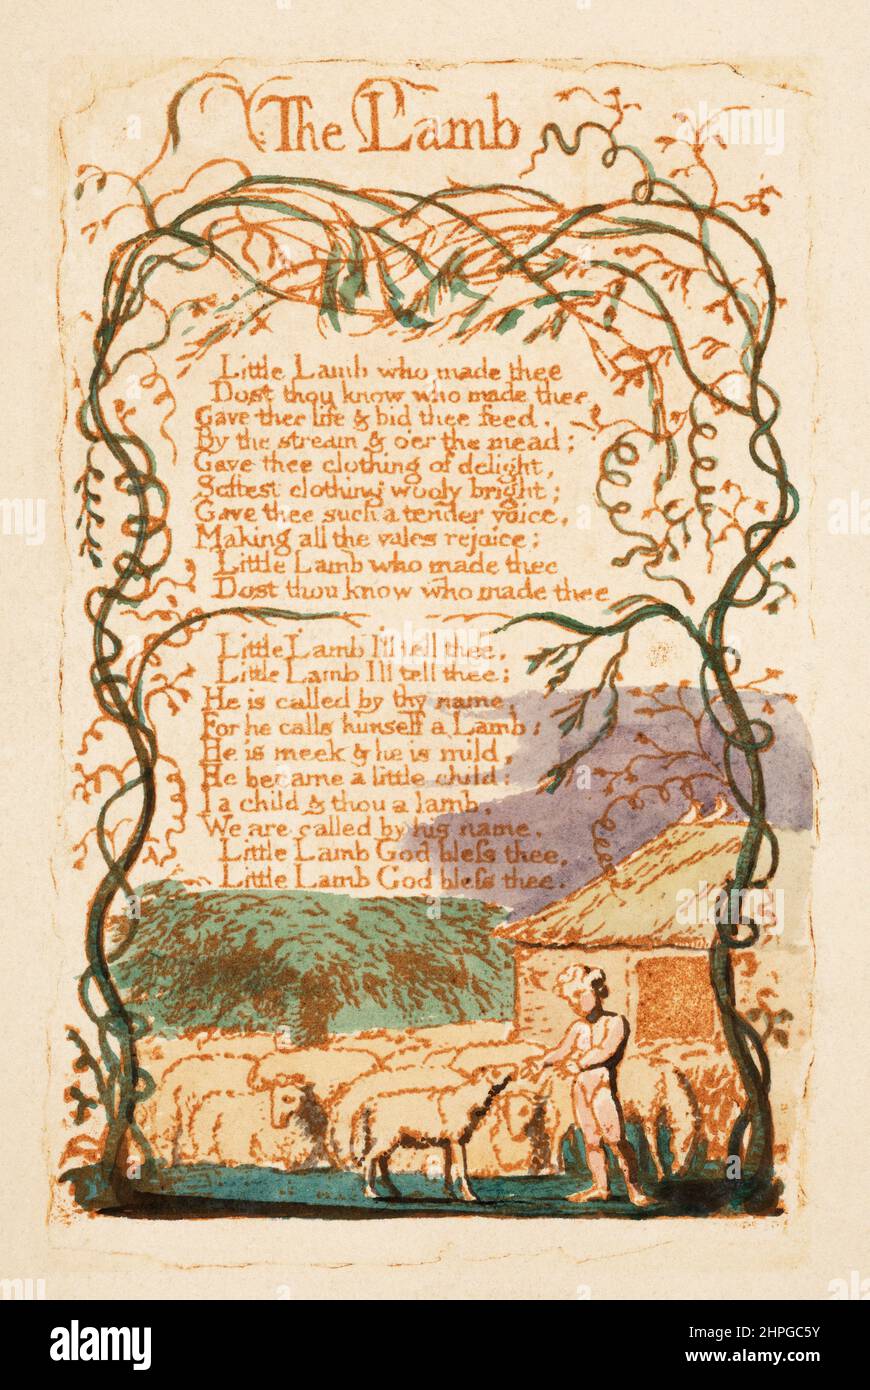 Illustration for The Lamb, from Songs of Innocence first published in 1799 by English poet and artist William Blake, 1757 - 1827. Stock Photo